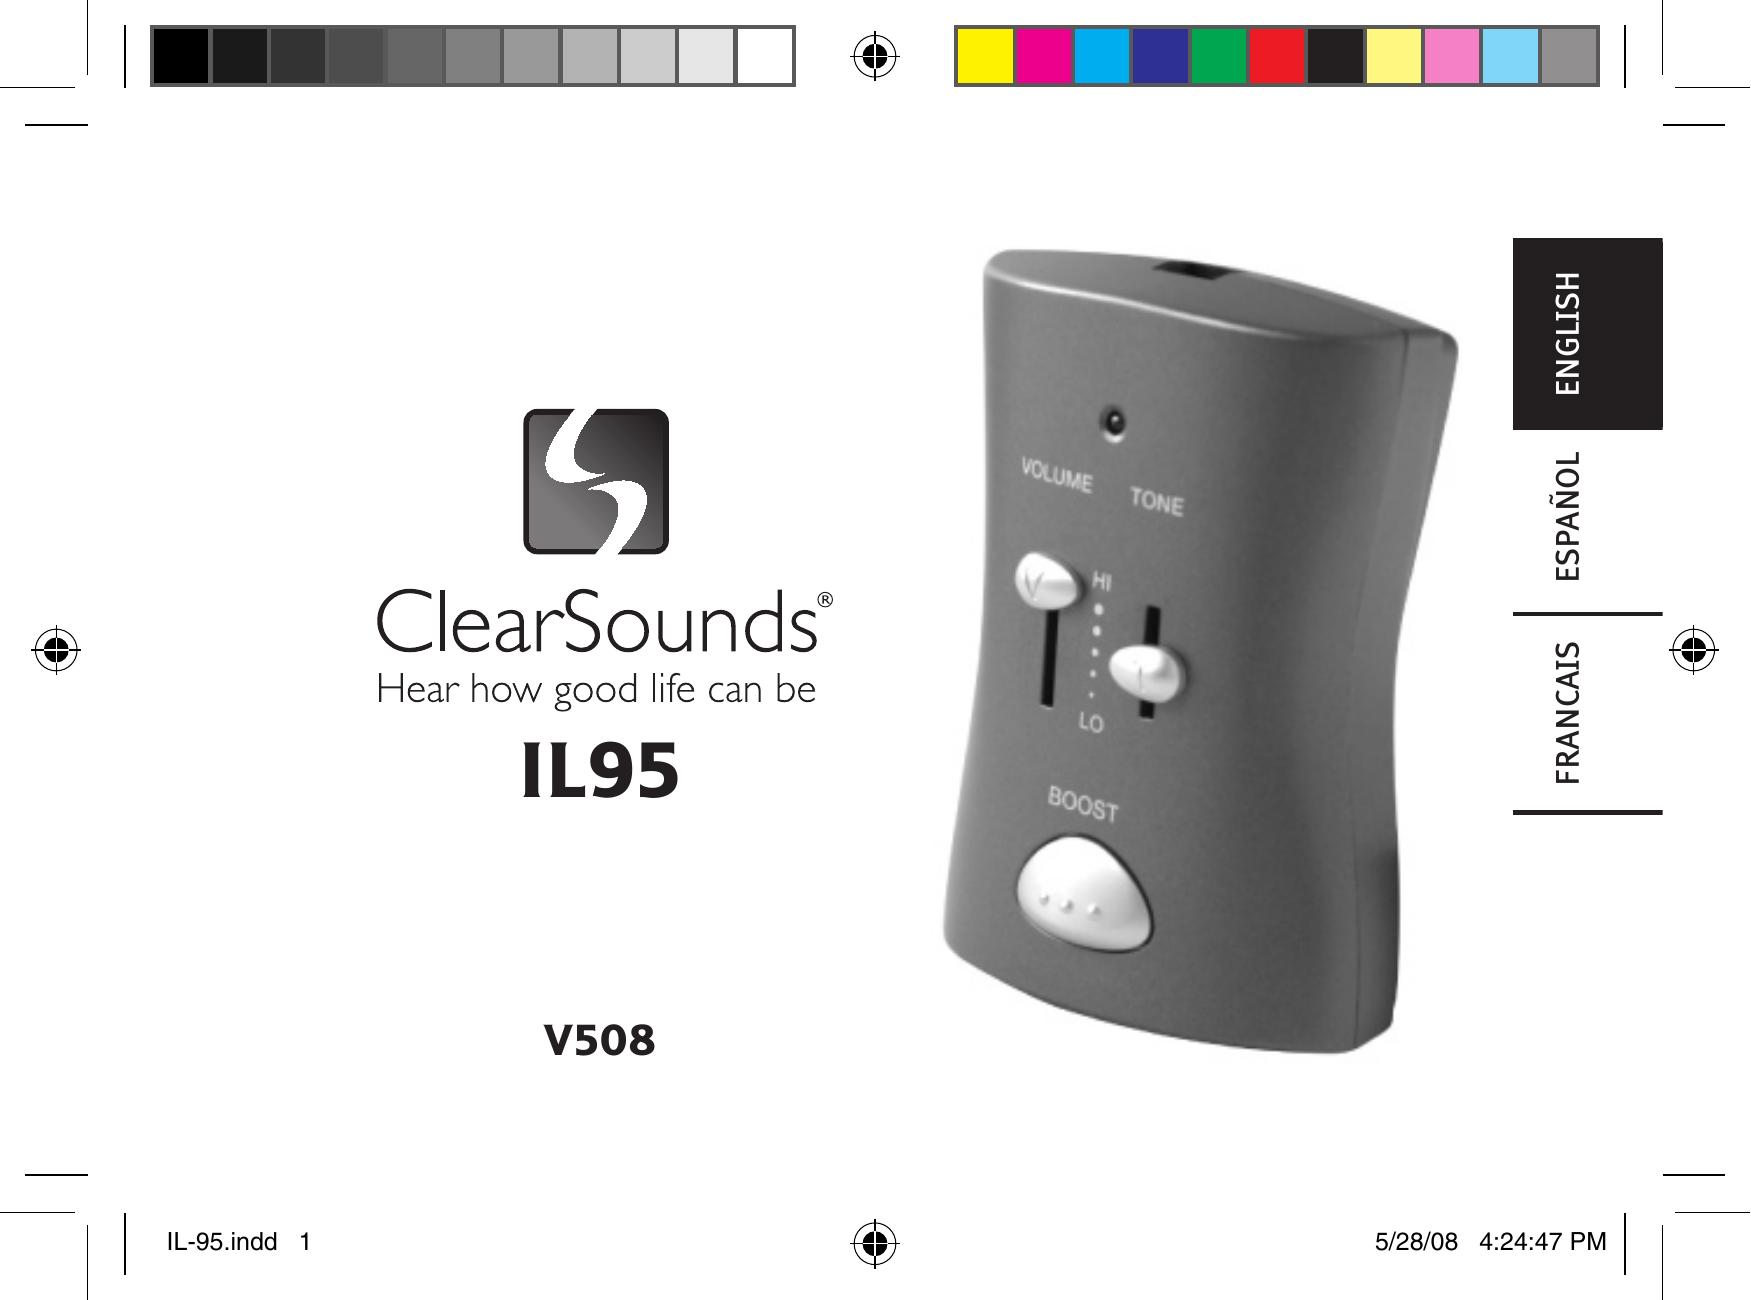 ClearSounds V508 Pole Saw User Manual